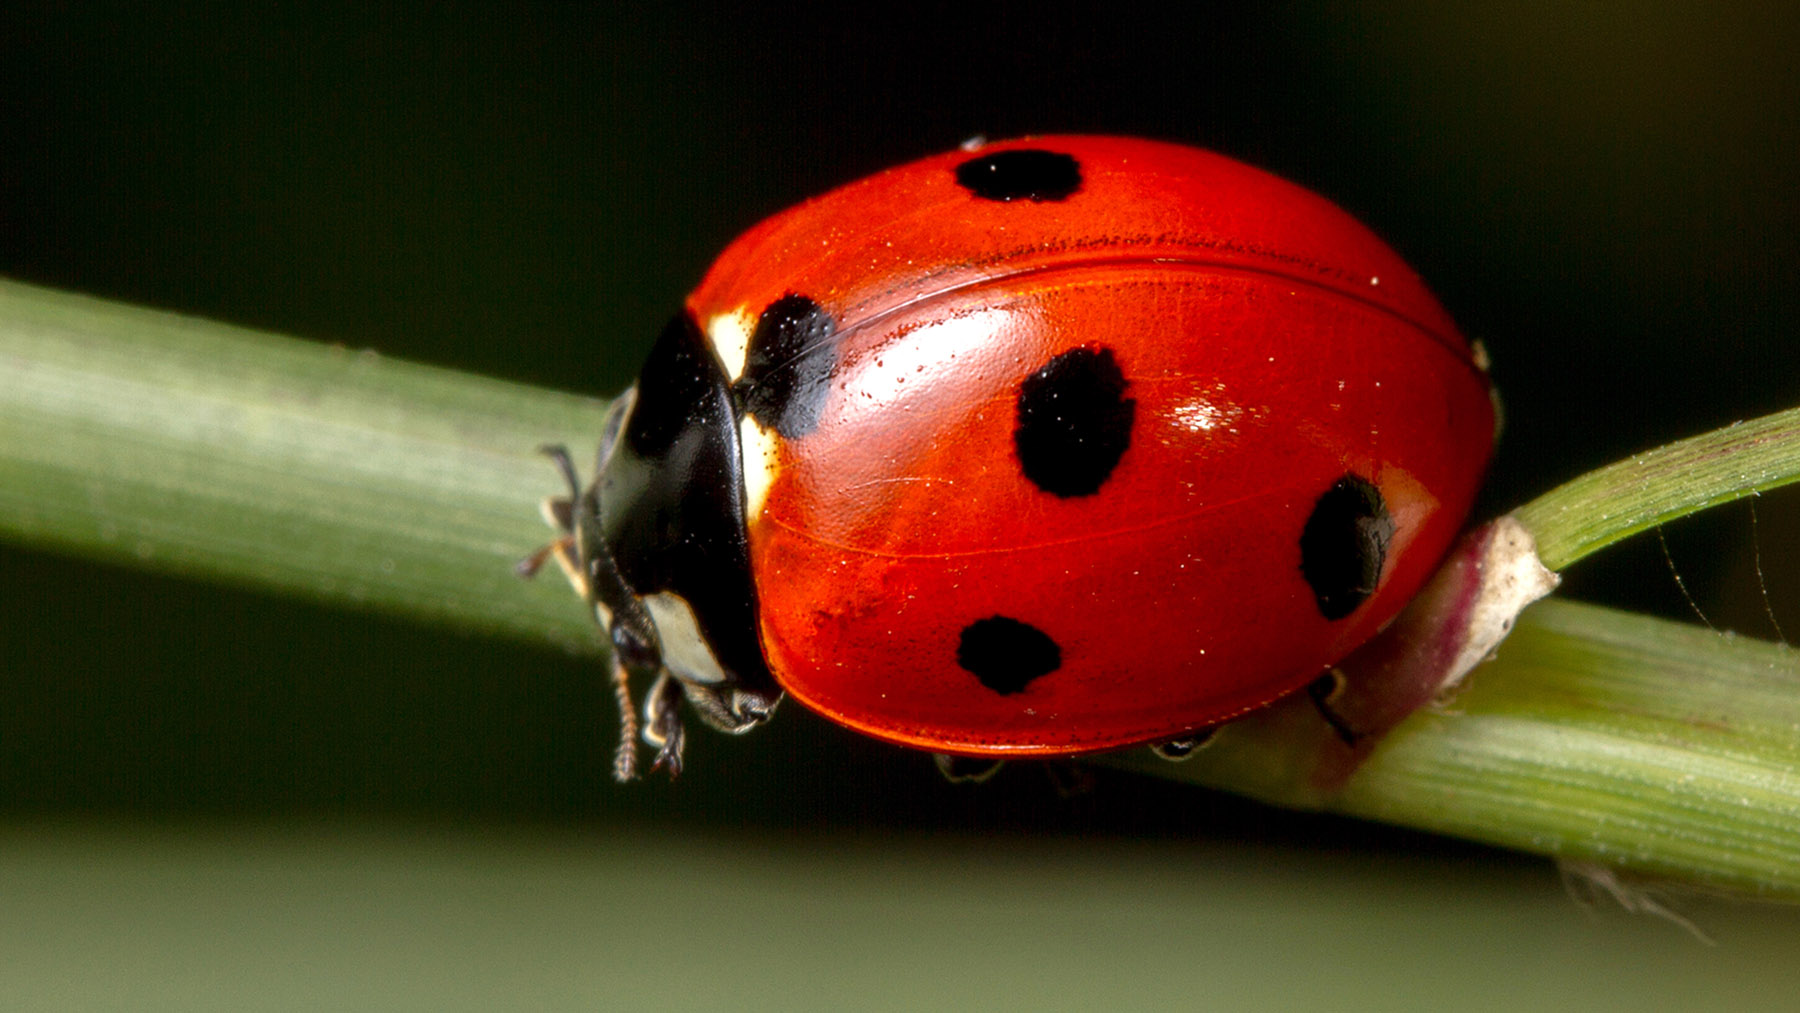 A ladybug perched on a blade of grass.